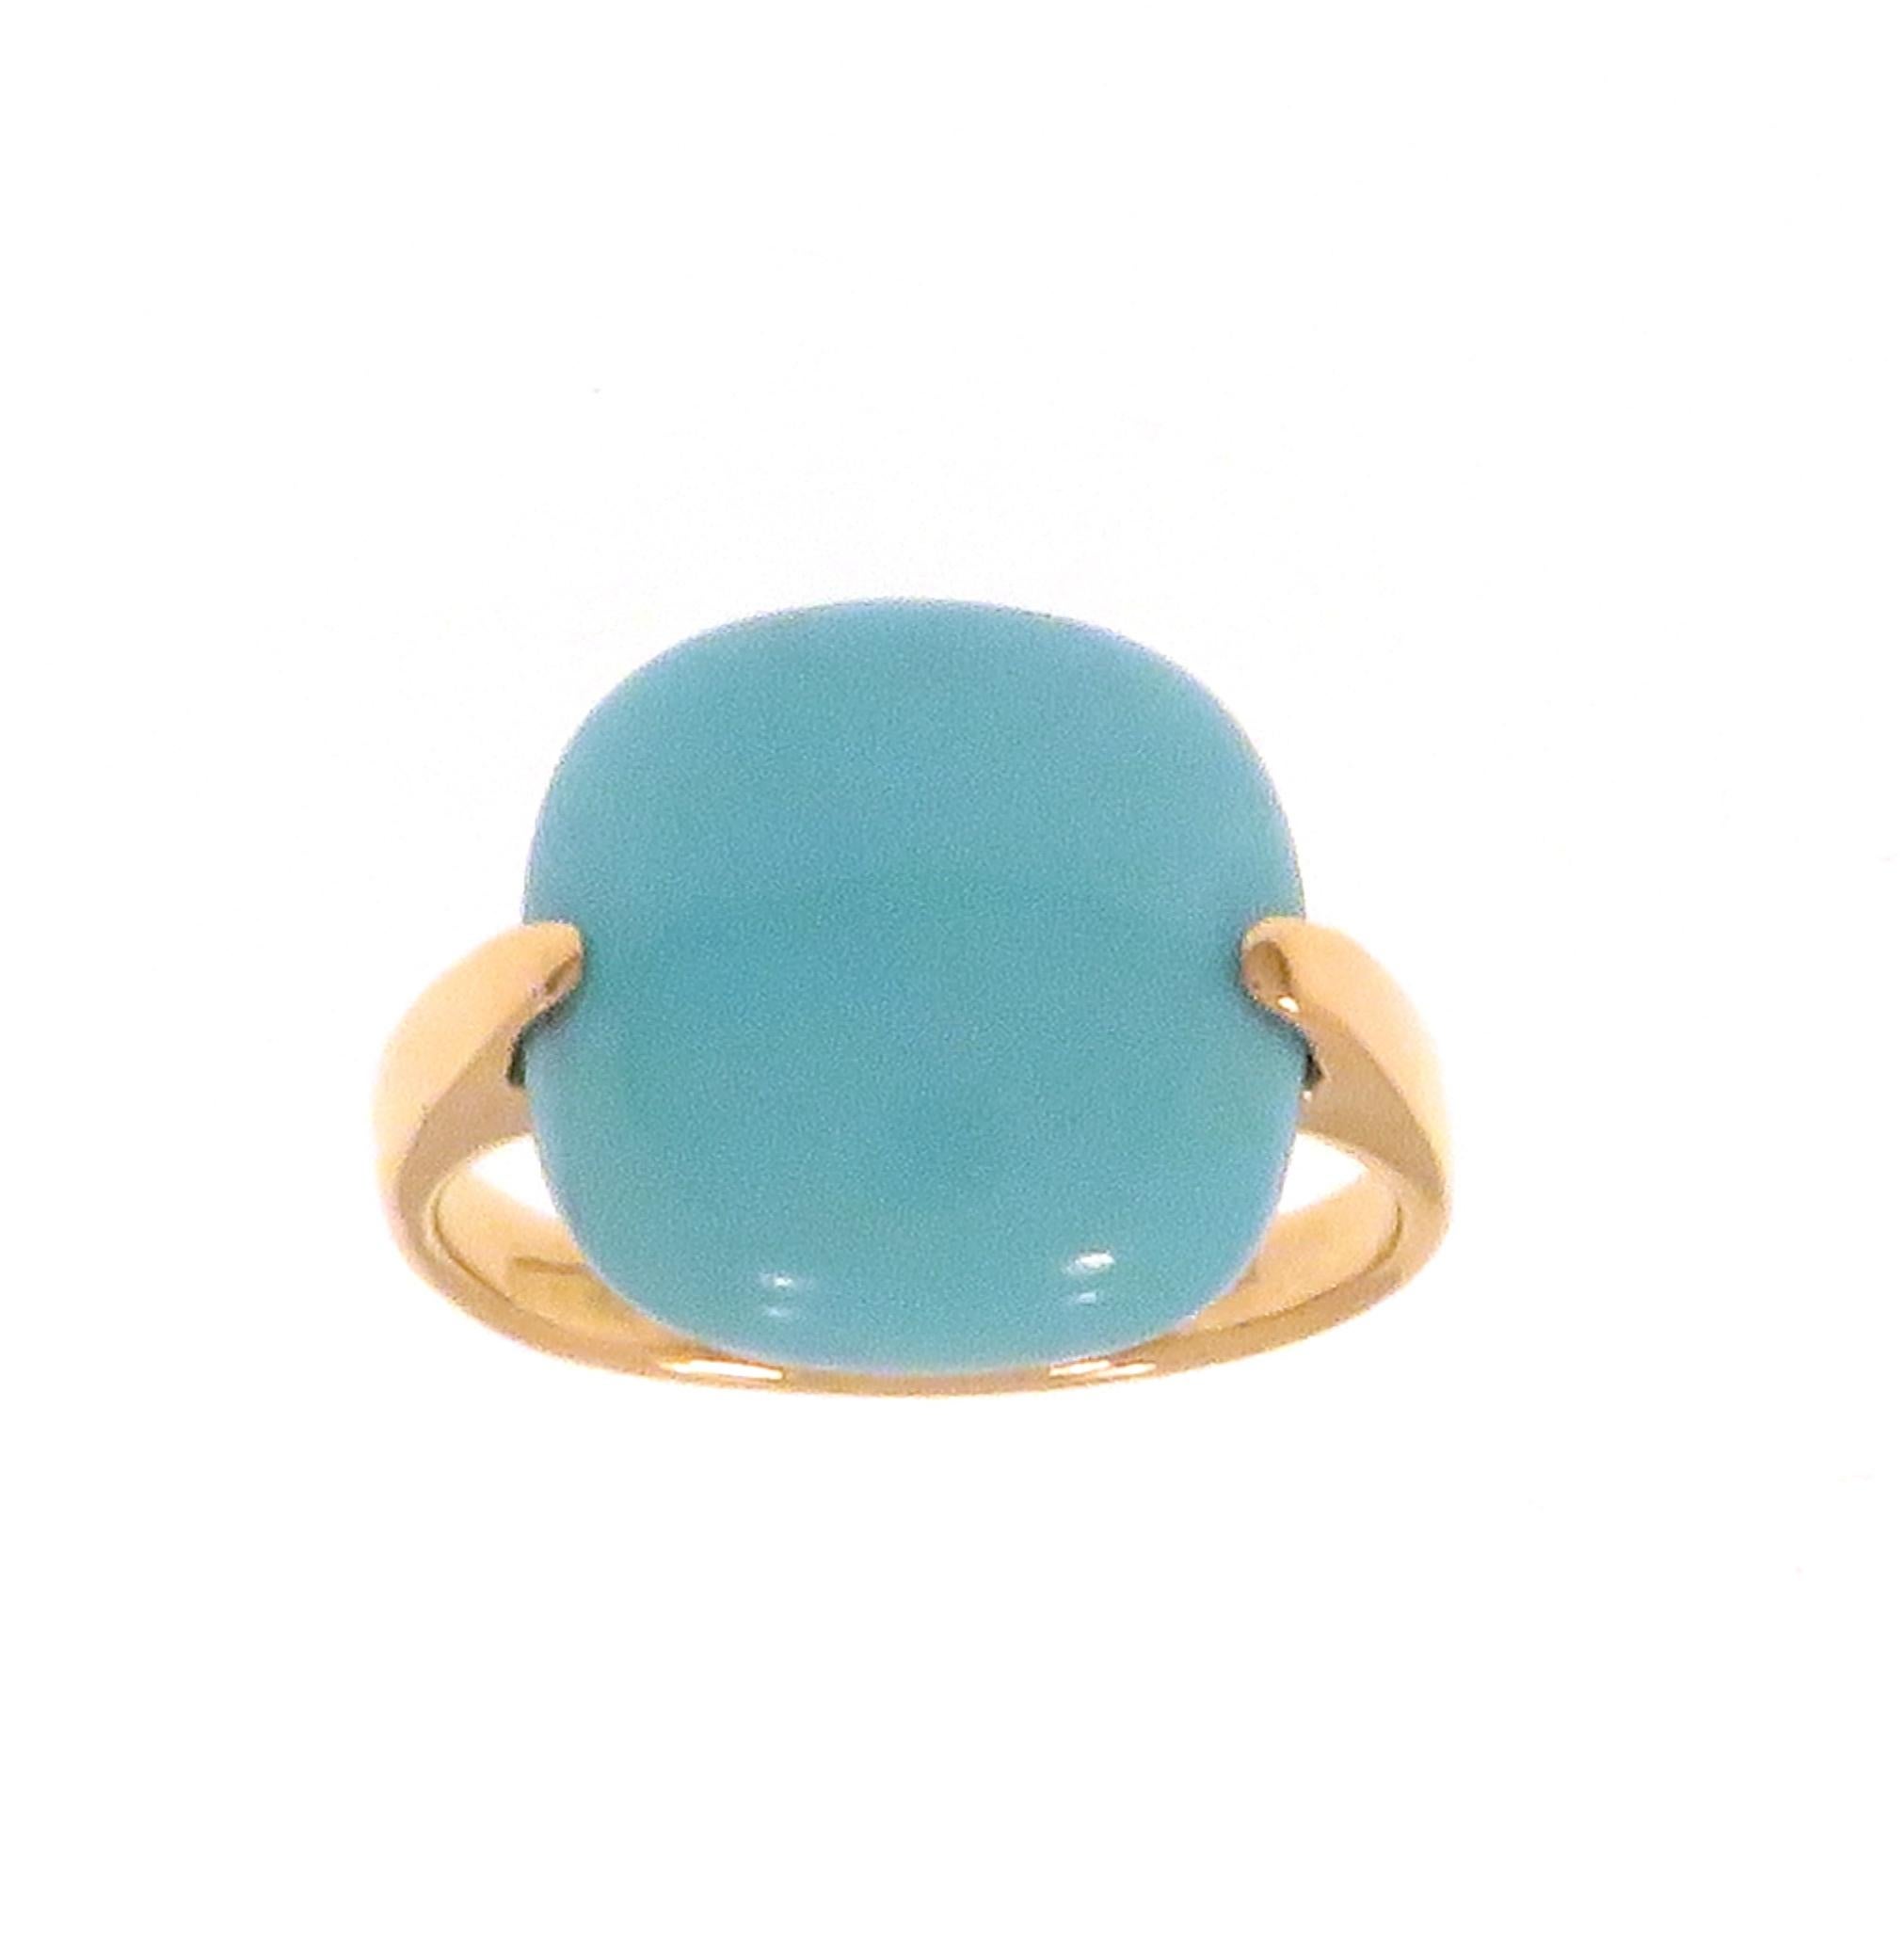 Modern ring in rose 18k gold with cabochon cut torquoise 
The size of the stone is: mm. 13 / 0.511 inches.
US size 5.5 / ITALIAN size 11 / FRENCH size 51 / can be sized.
It  is market with the Italian Mark 750 and Botta Gioielli brandmark